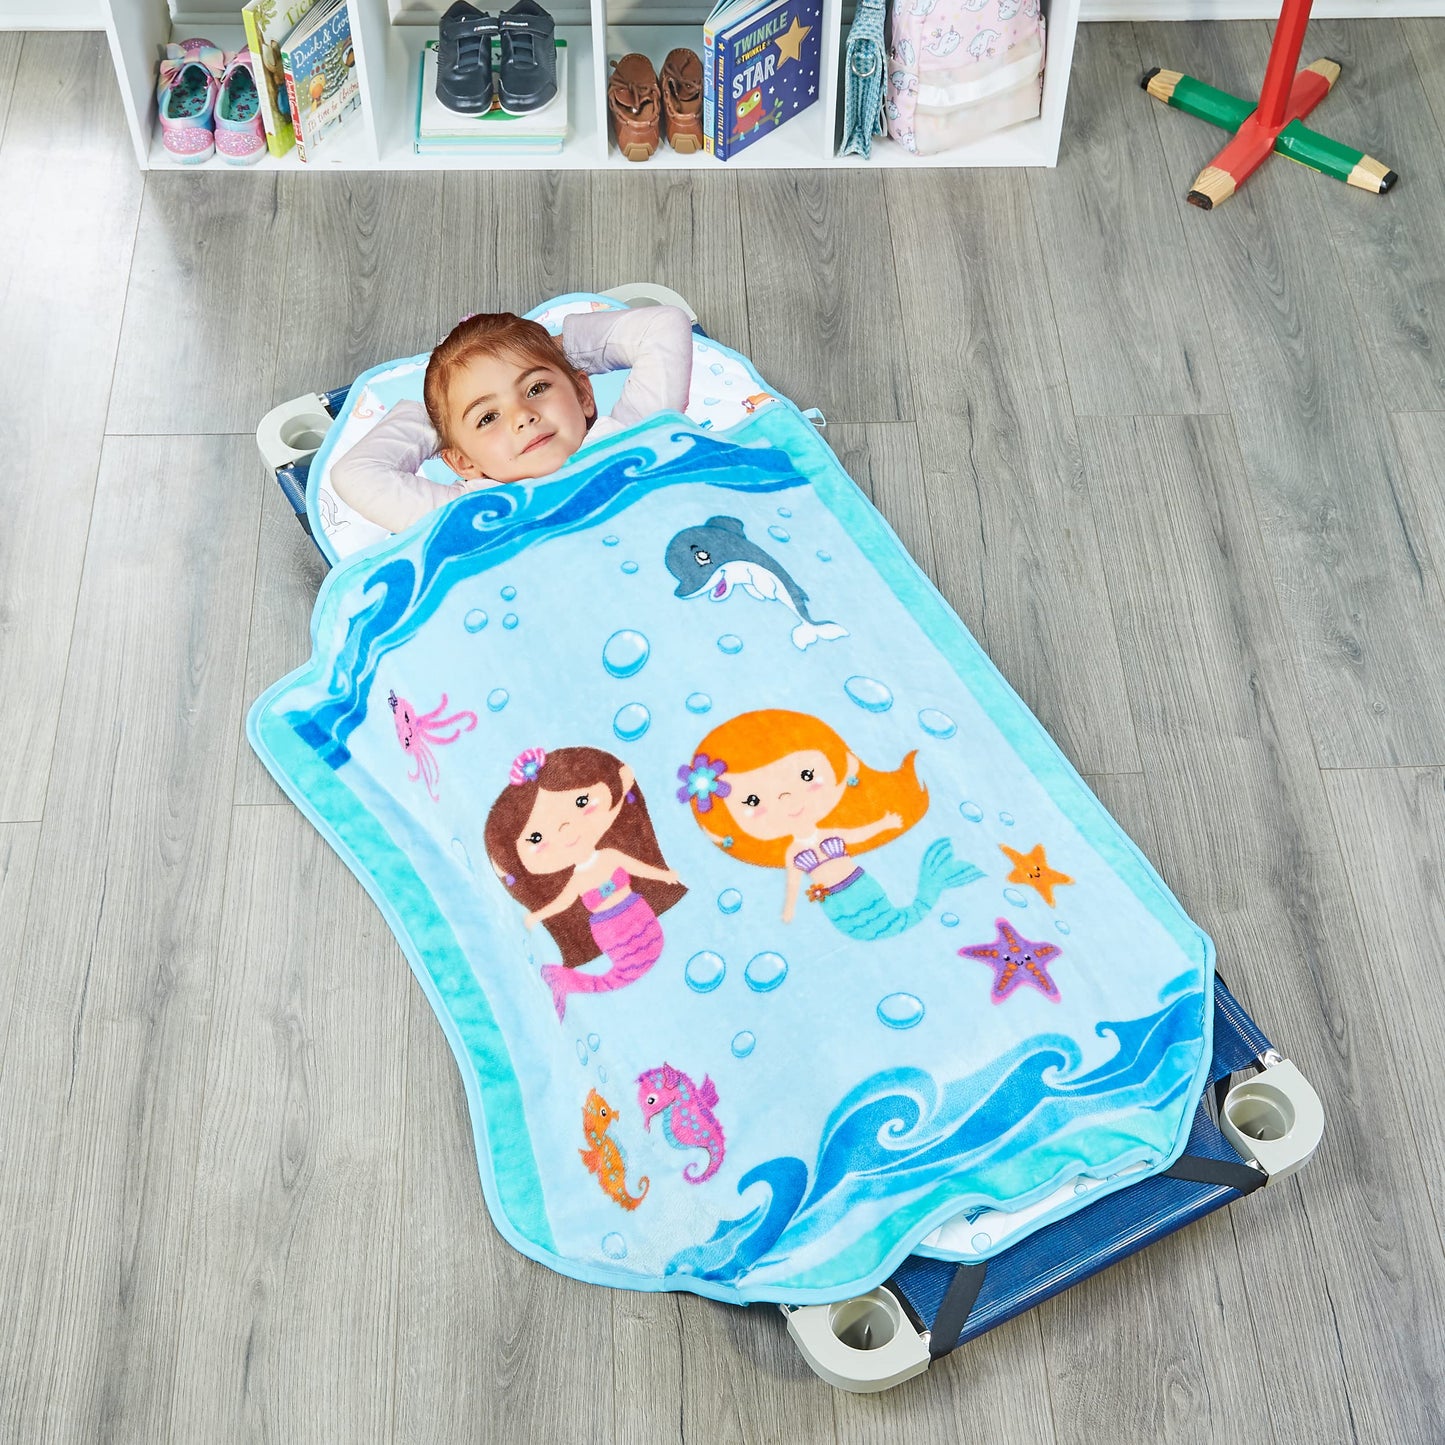 EVERYDAY KIDS Toddler Nap Mat with Removable Pillow -Princess Storyland- Carry Handle with Fastening Straps Closure, Rollup Design, Soft Microfiber for Preschool, Daycare, Sleeping Bag -Ages 2-6 years